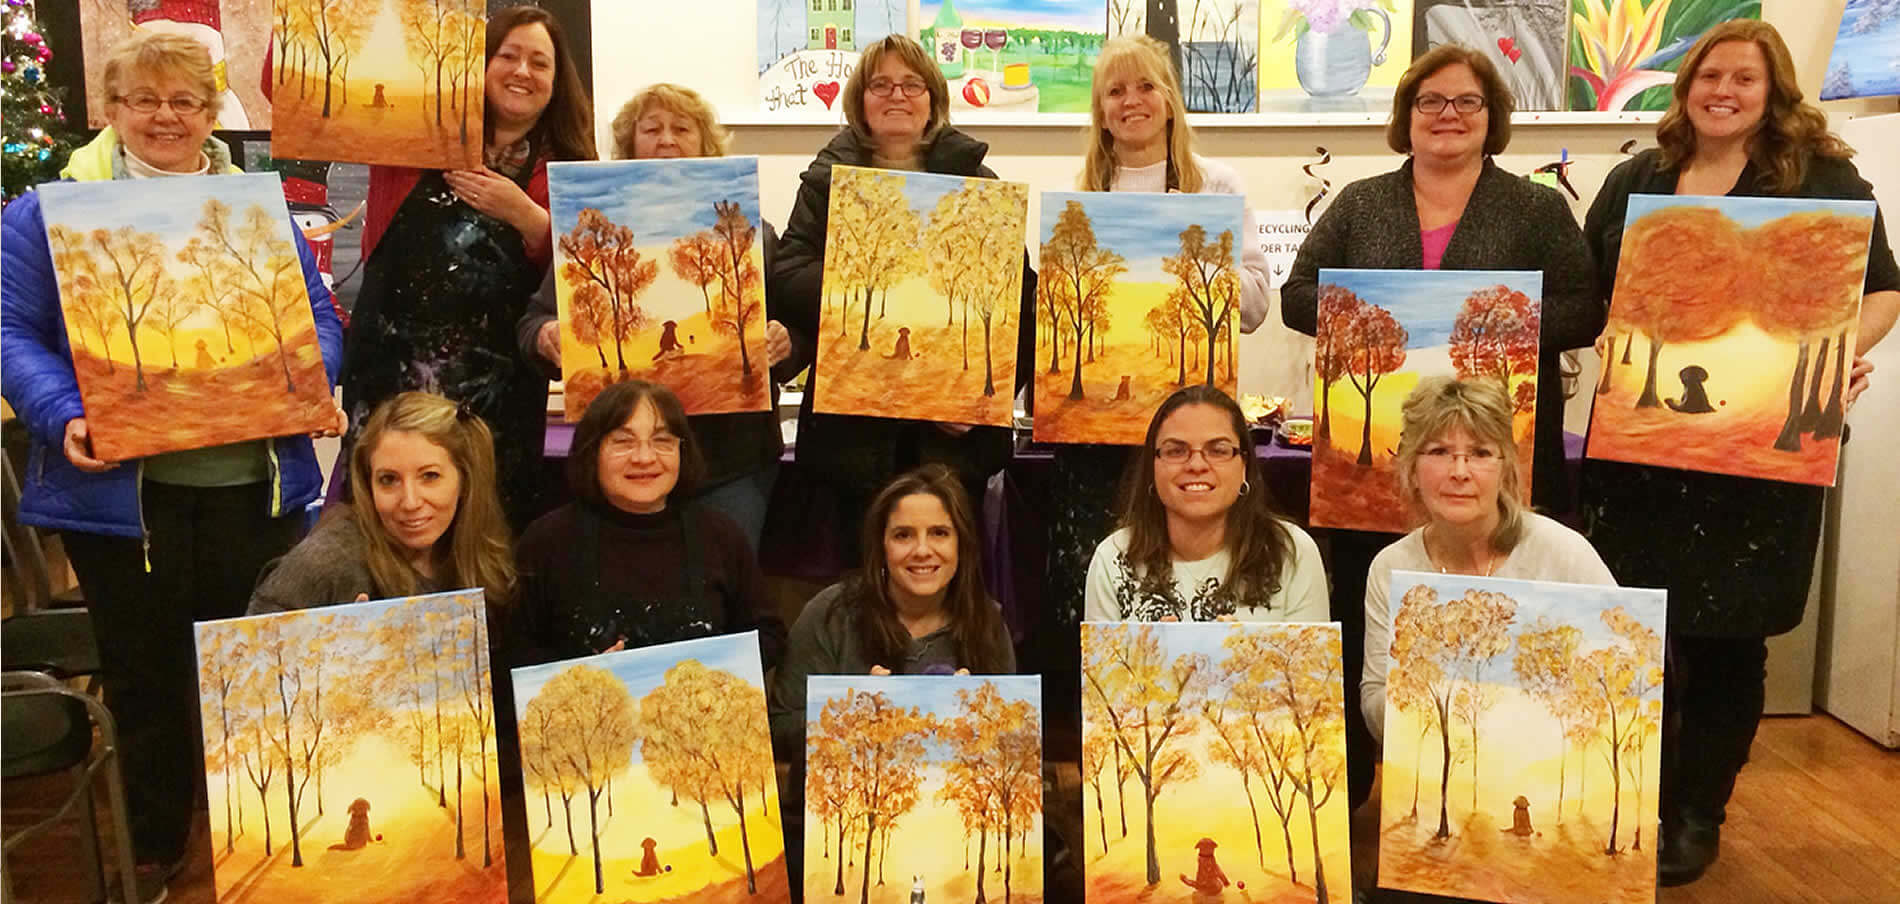 Group of women showing paintings of trees and dogs